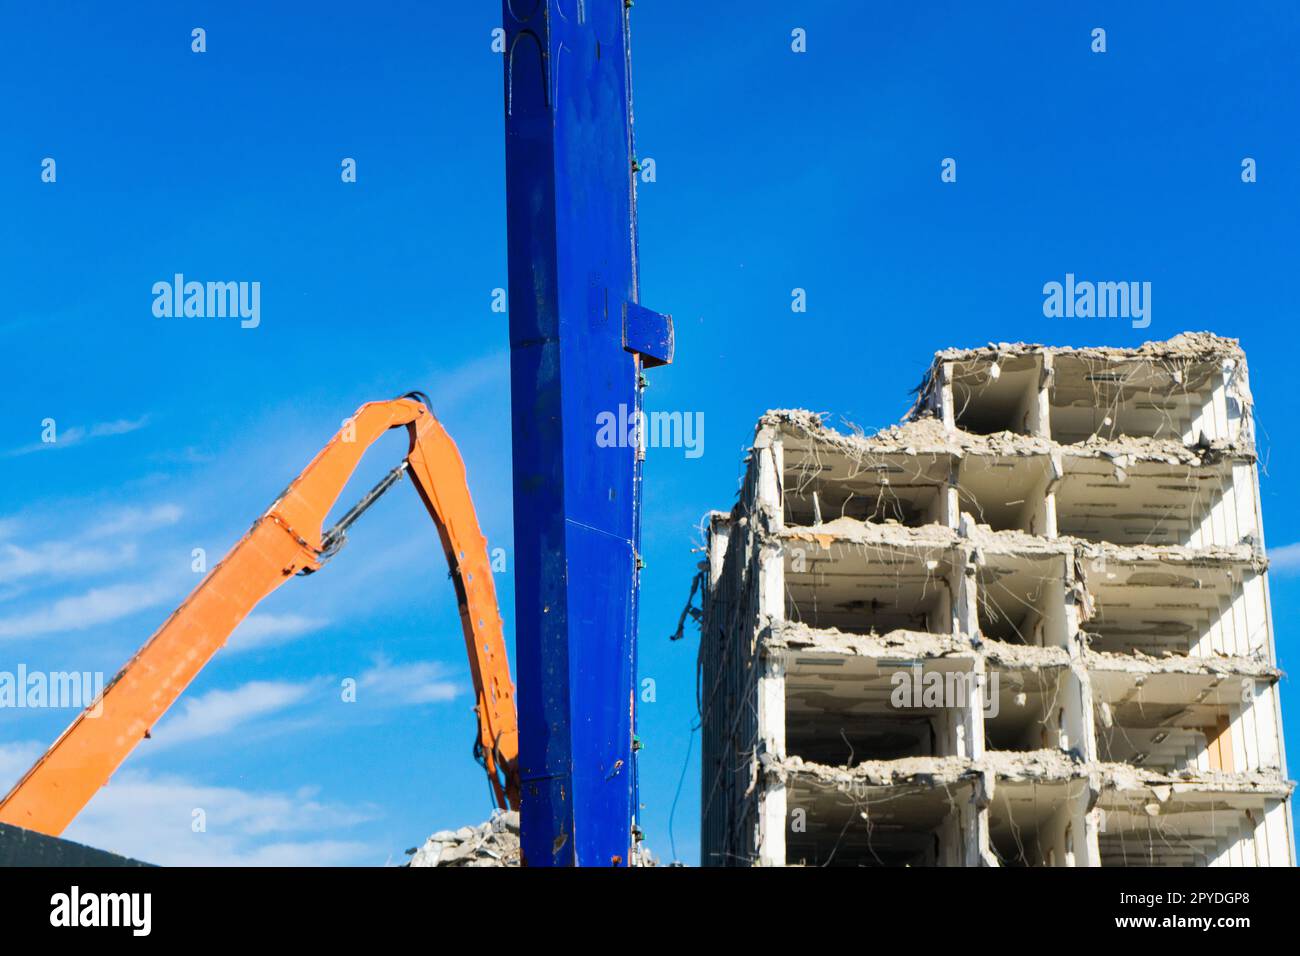 Construction site digger yellow demolishing house for reconstruction Stock Photo